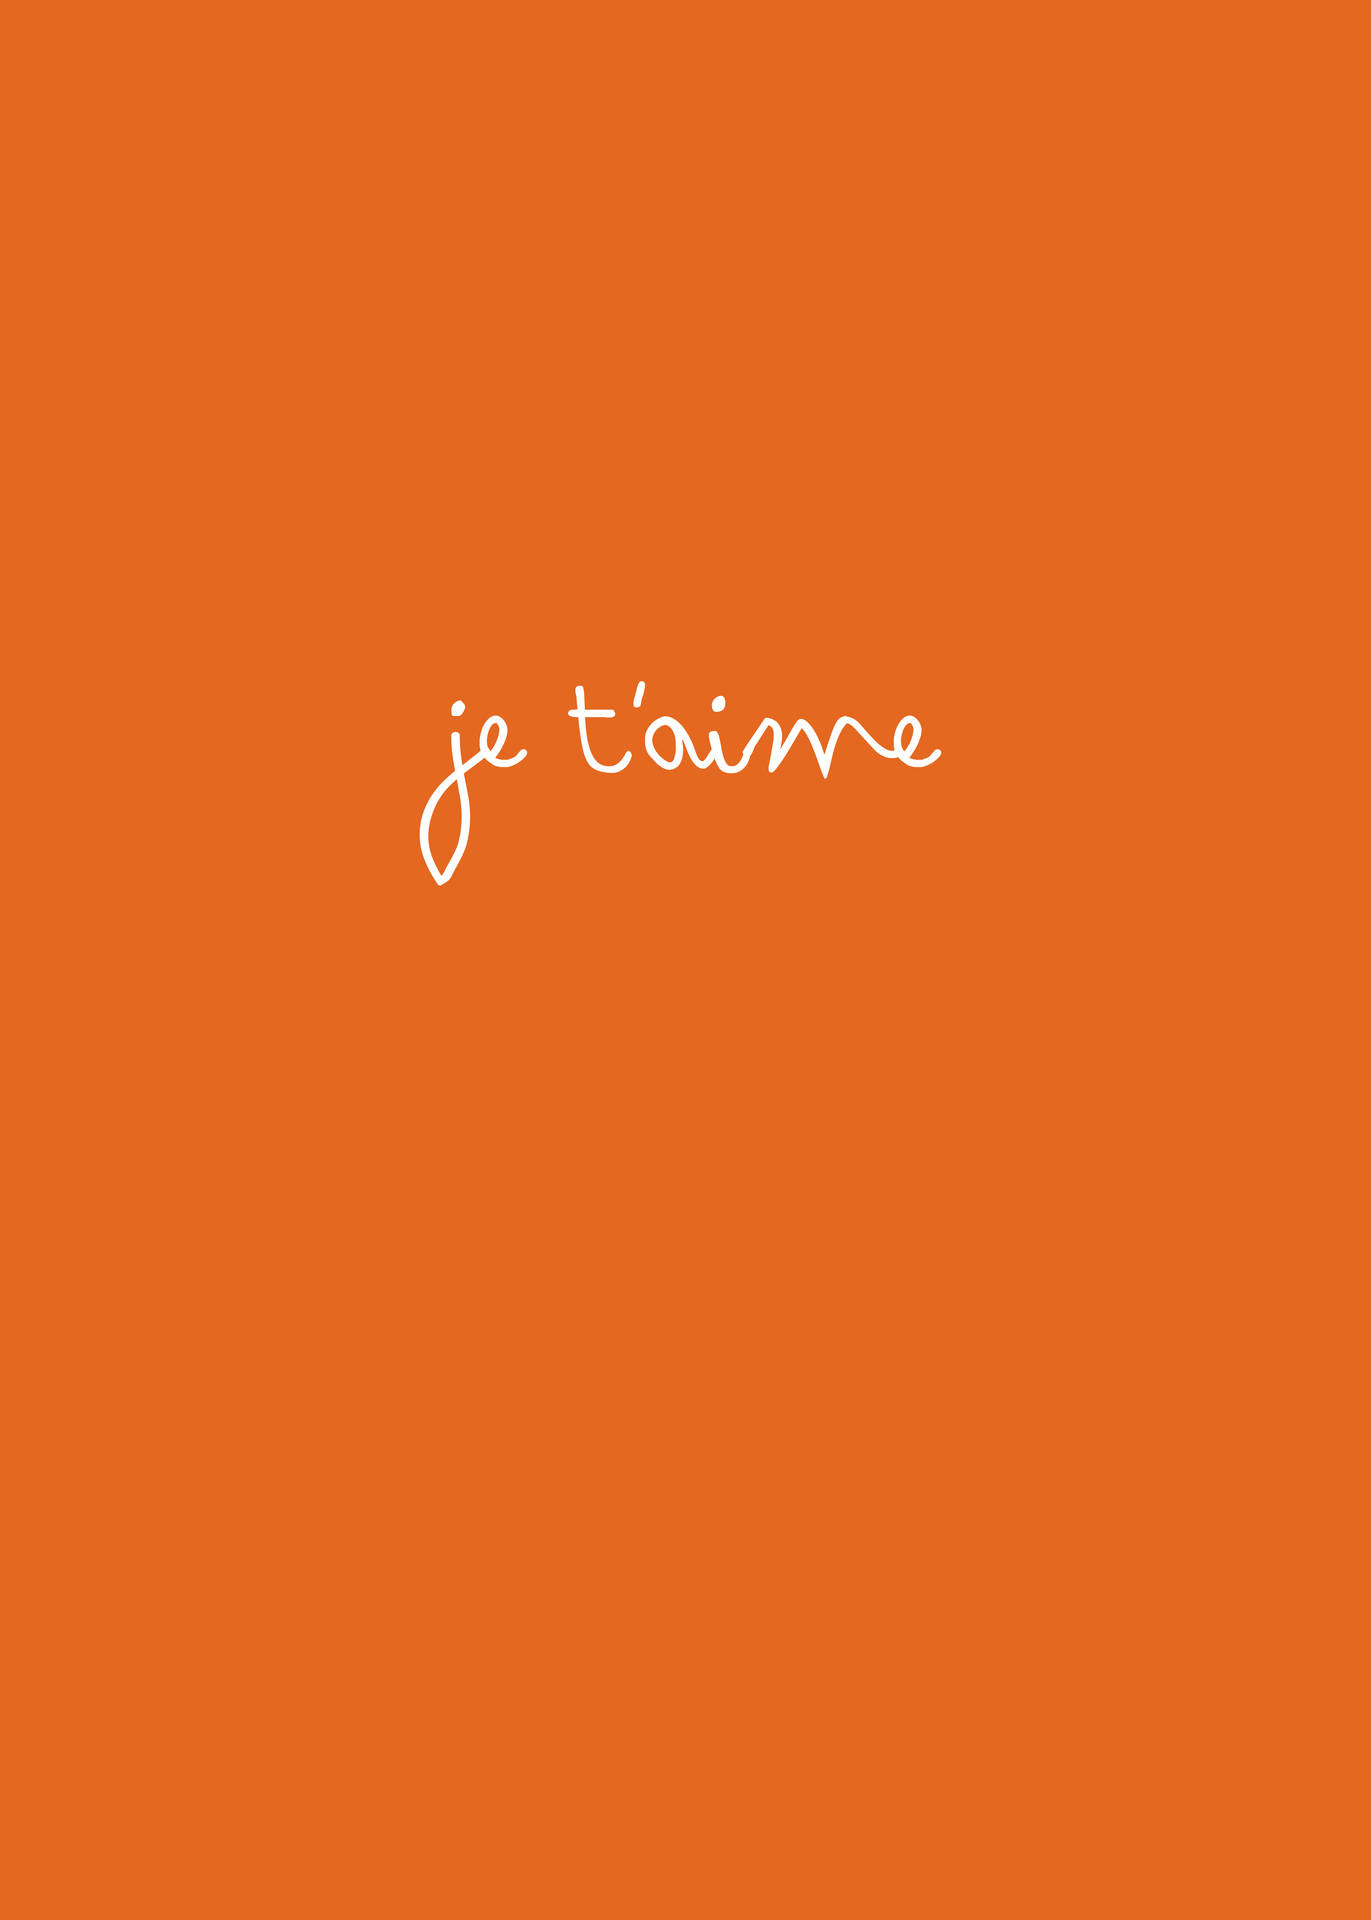 Je T'aime Love Quotes Background